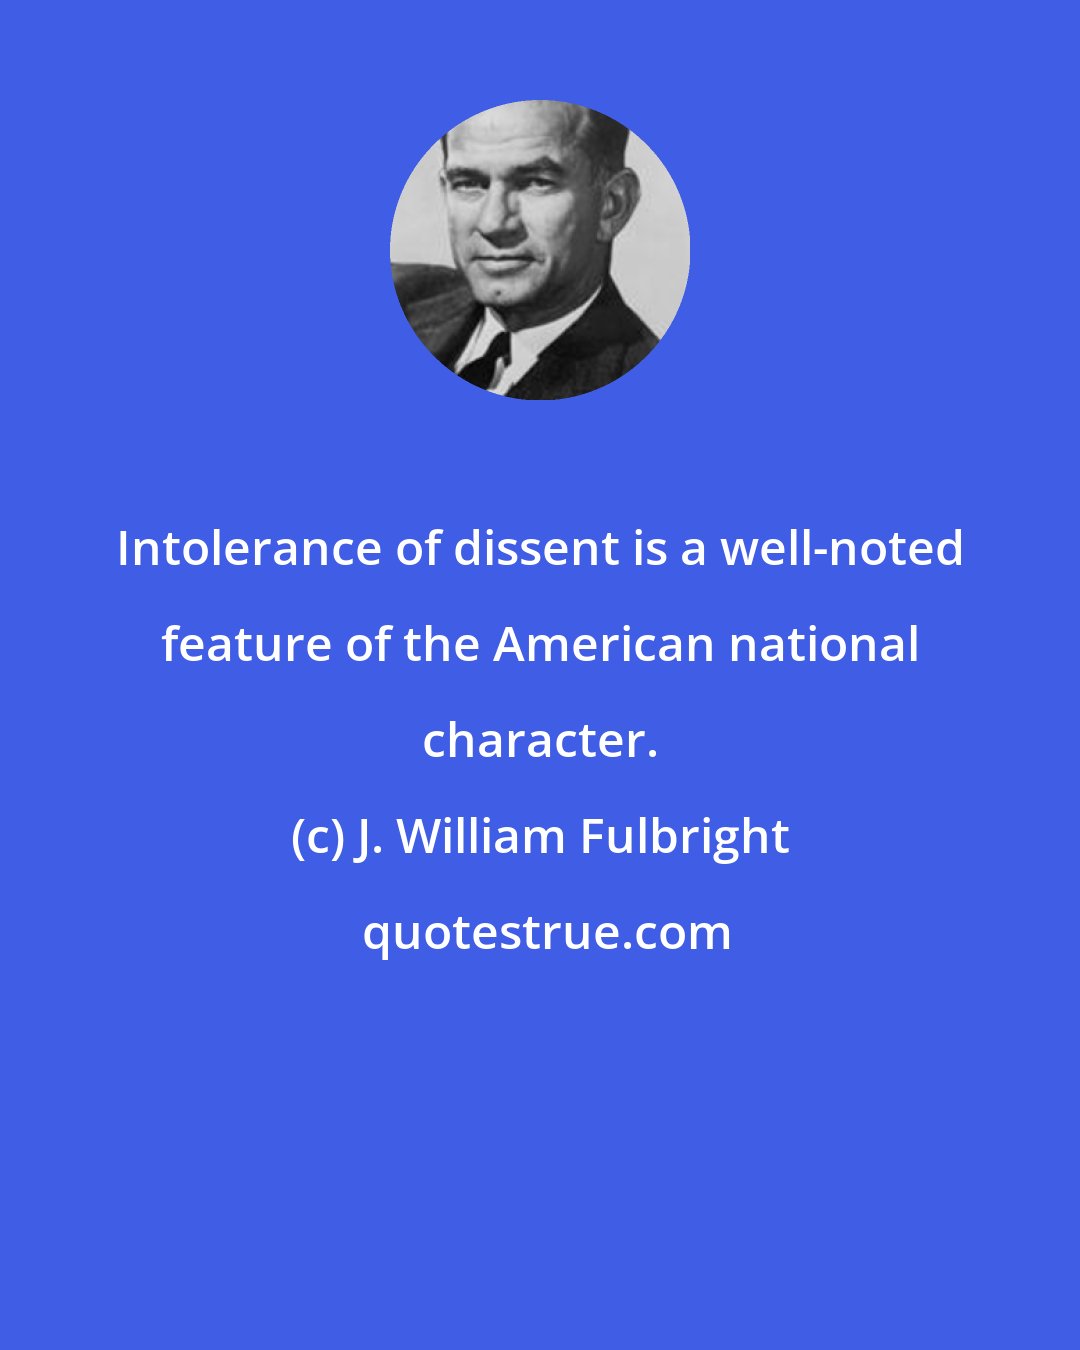 J. William Fulbright: Intolerance of dissent is a well-noted feature of the American national character.